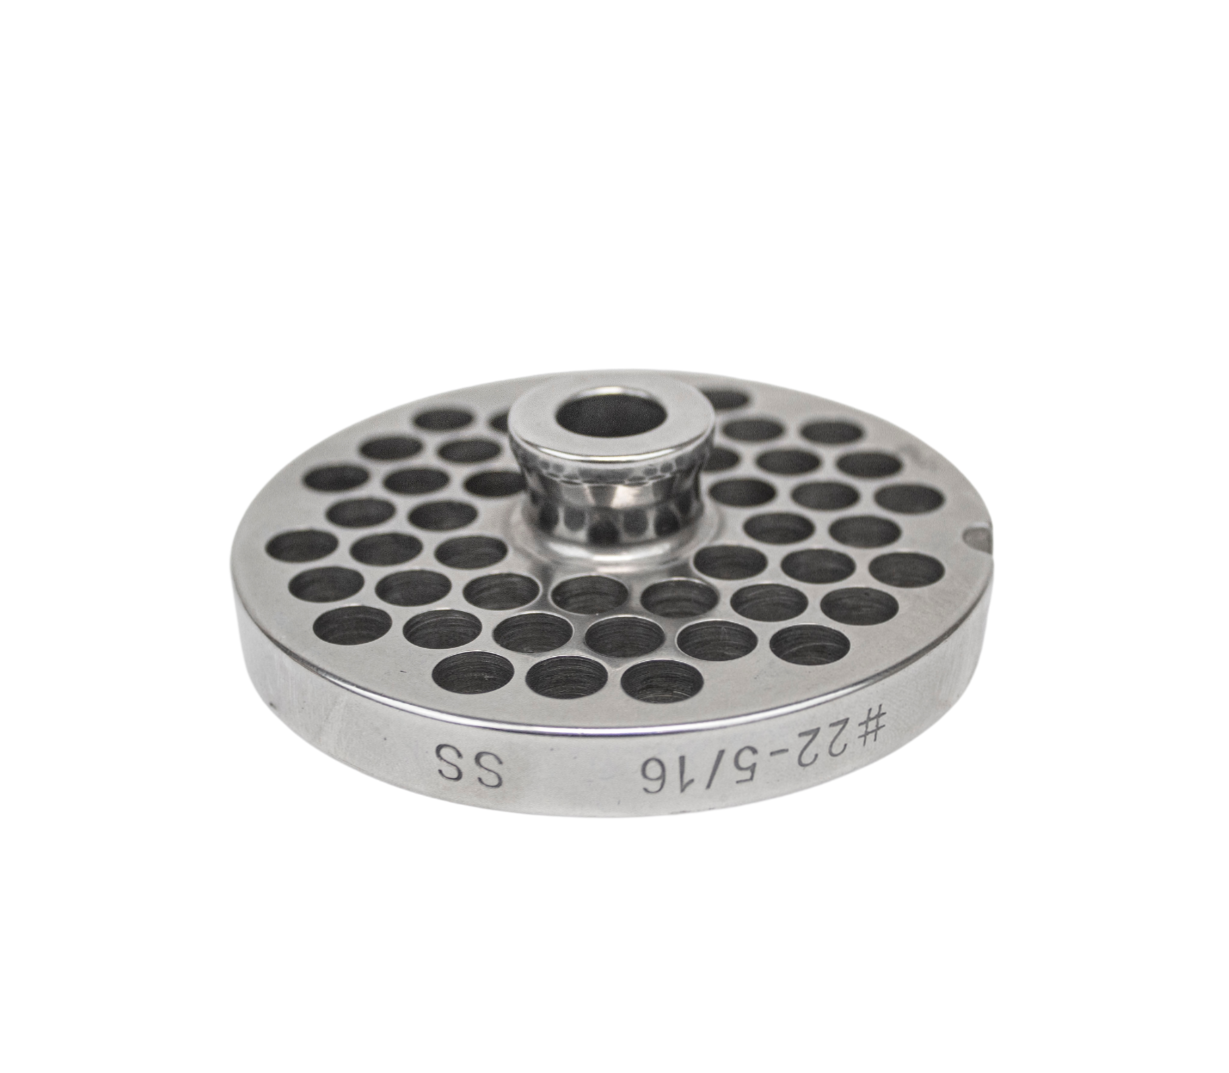 Grinder Plate #22 with 5/16" Hole - Hub Style Fitting Biro, Hobart and Hollymatic Grinders.